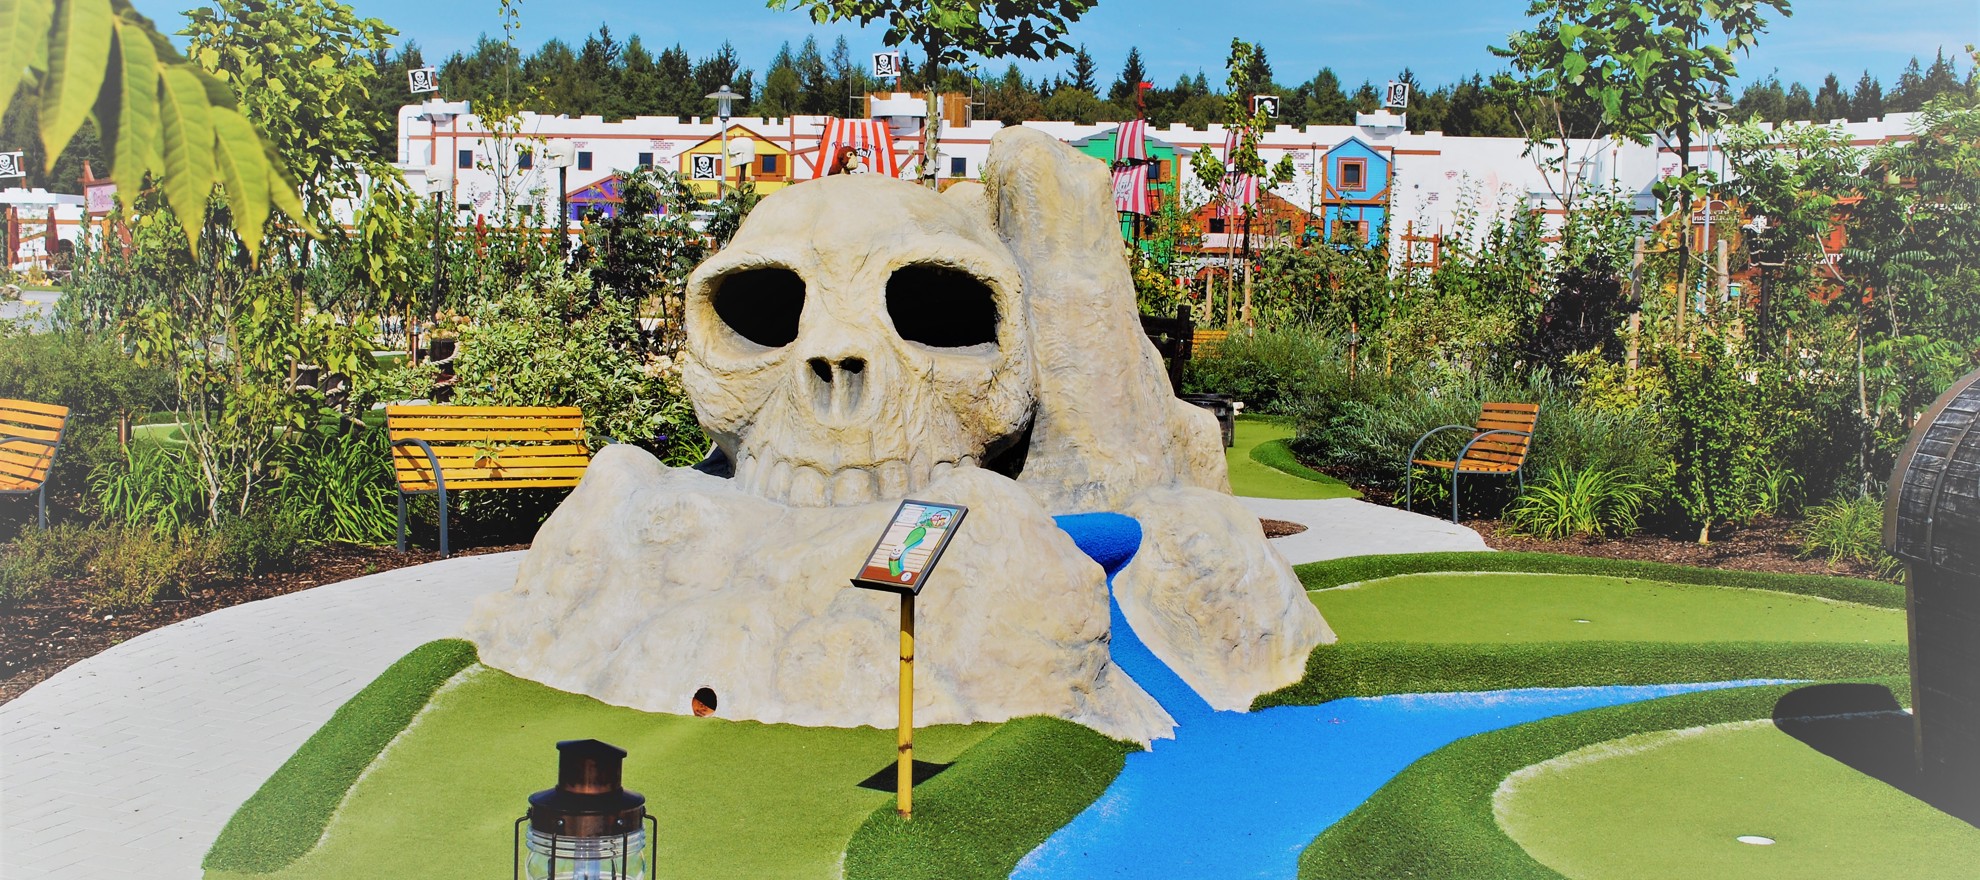 View of the Pirate Adventure Golf course at the LEGOLAND Holiday Village with the 142-room Pirate Island hotel in the background.